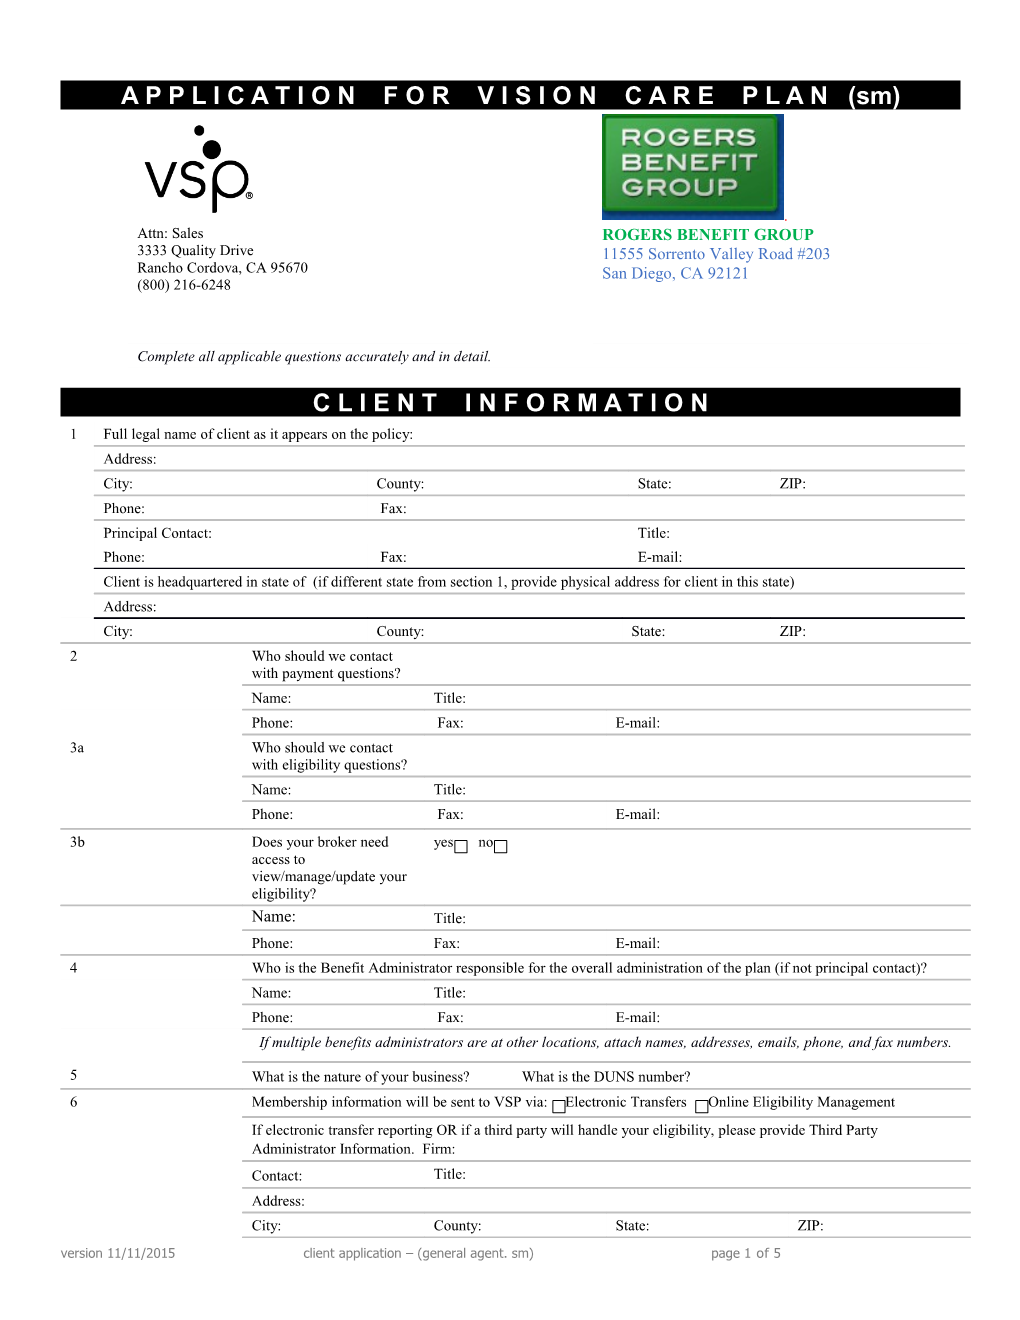 General Agent Application for Vision Care